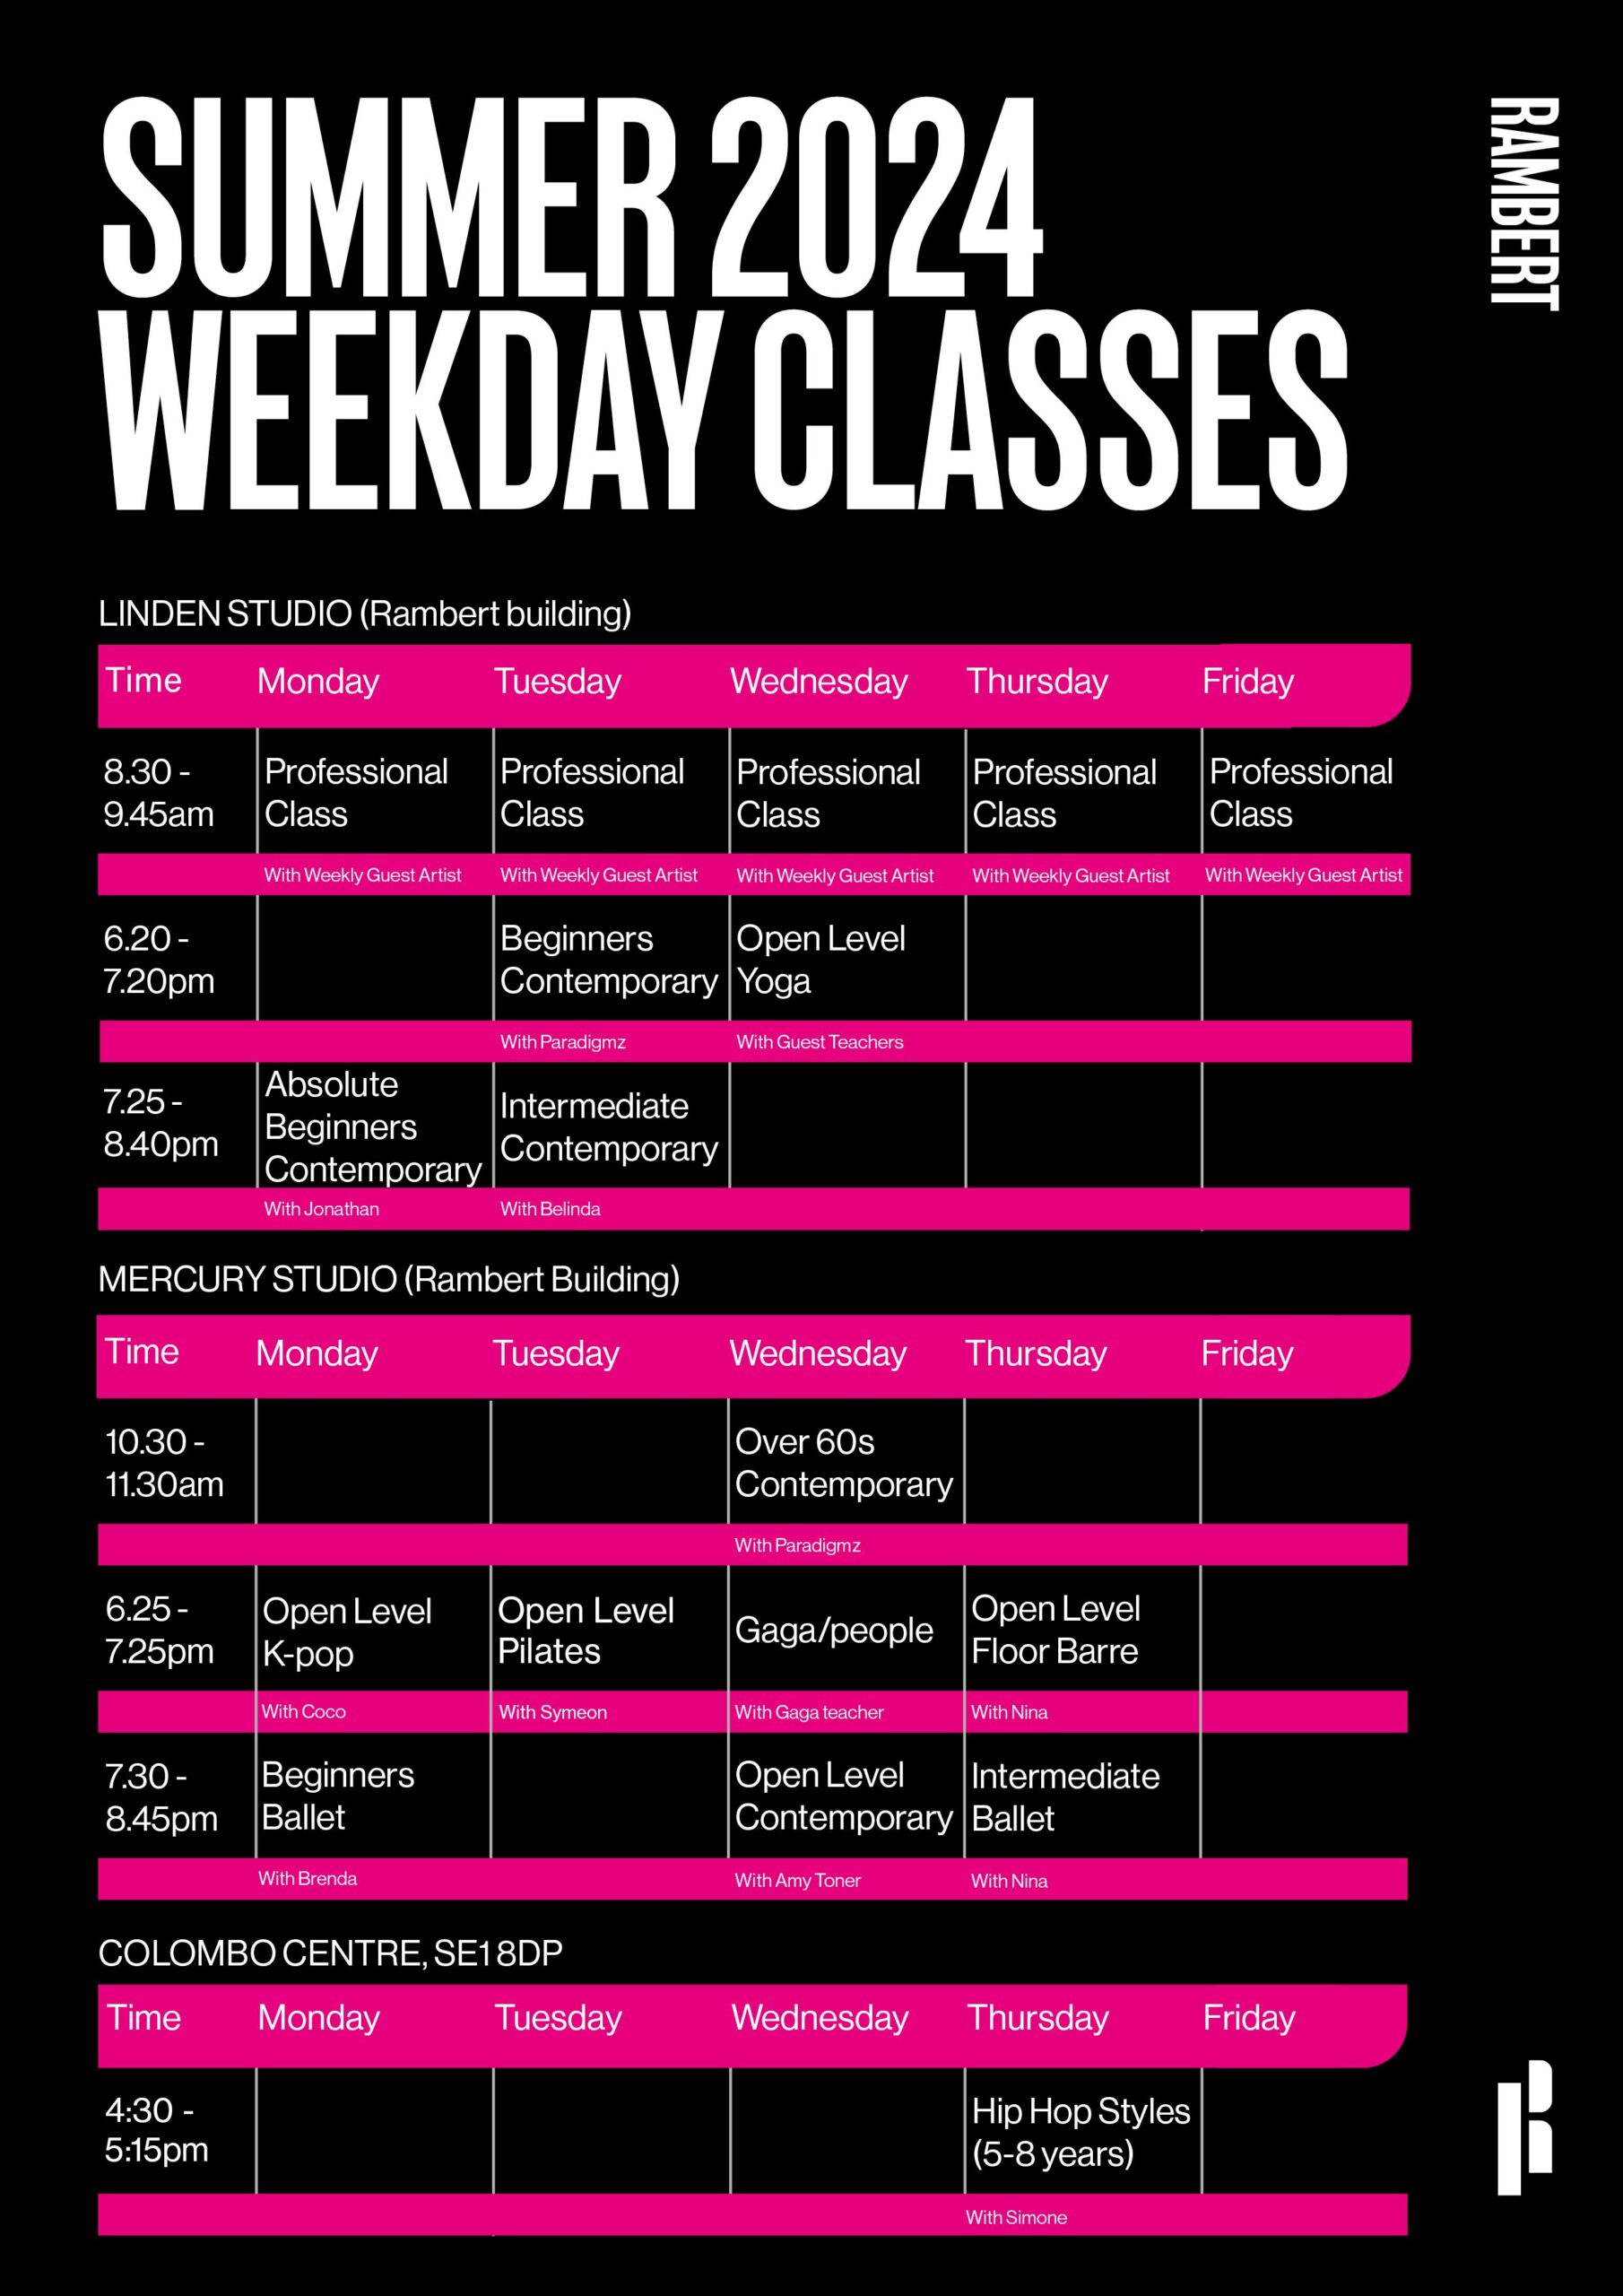 Class schedule for summer 2024, showing weekday sessions across three venues: Linden Studio, Mercury Studio, and Colombo Centre. Sessions include yoga, pilates, dance, and styles like Afrobeat and Hip Hop.